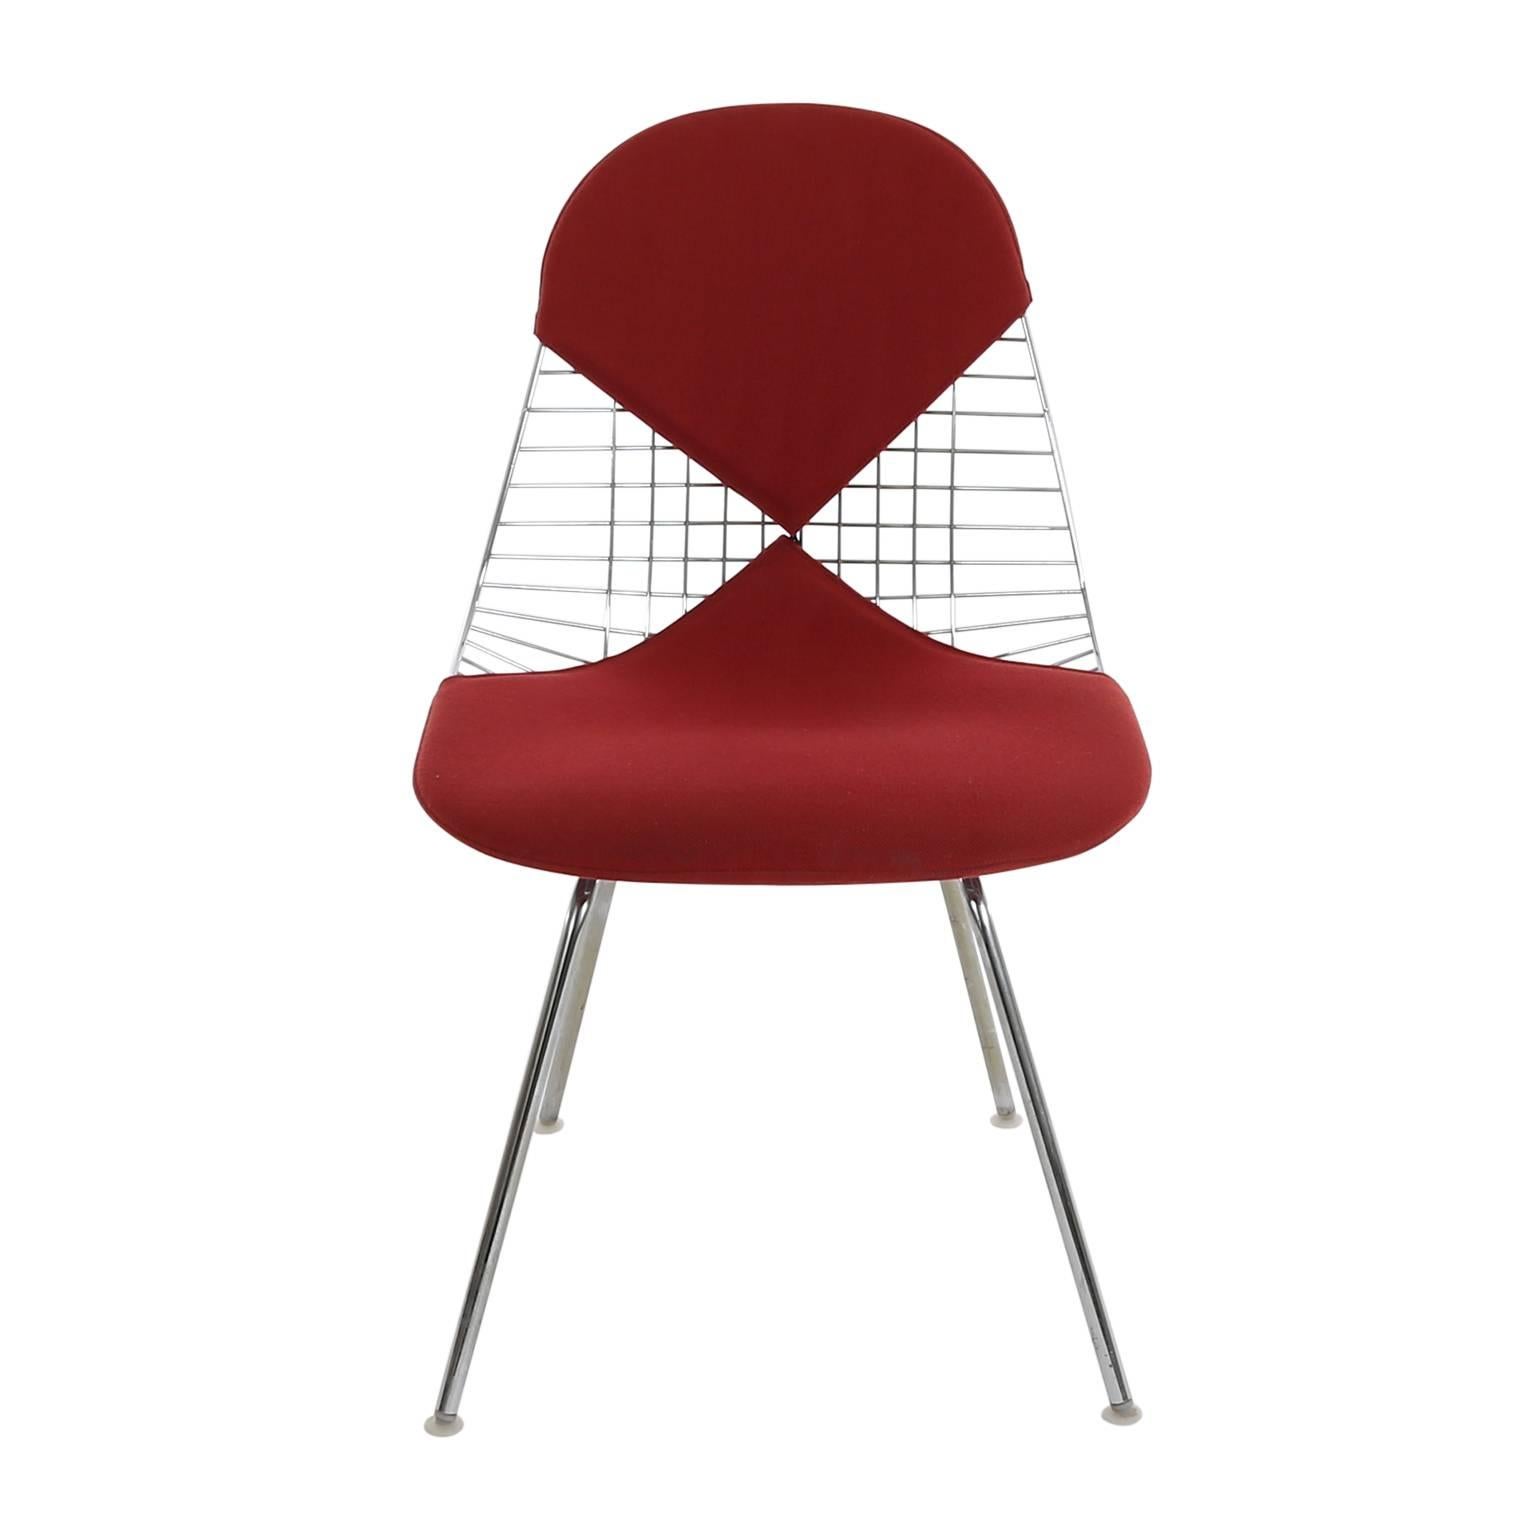 Three original wire chairs DKX 5 designed by Ray & Charles Eames in 1951 and produced by Vitra.
The three chairs have the original bikini cover in red. The chair legs have some rust, what shown age and originality. This could be also be